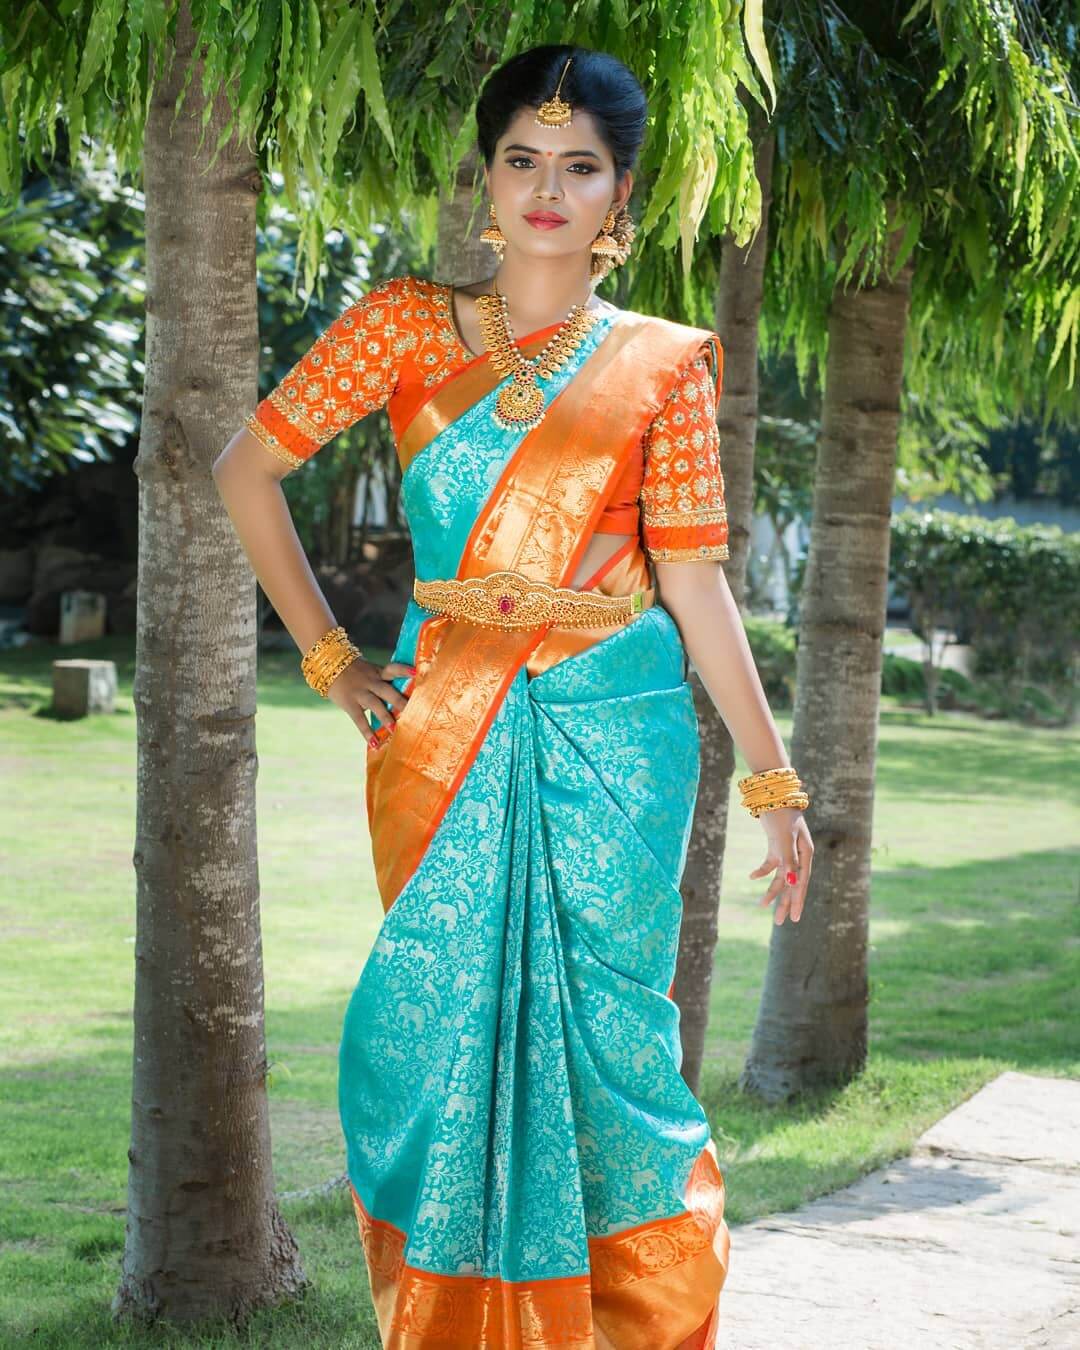 South Indian Wedding Saree for Traditional Bride South Indian wedding saree in blue and orange